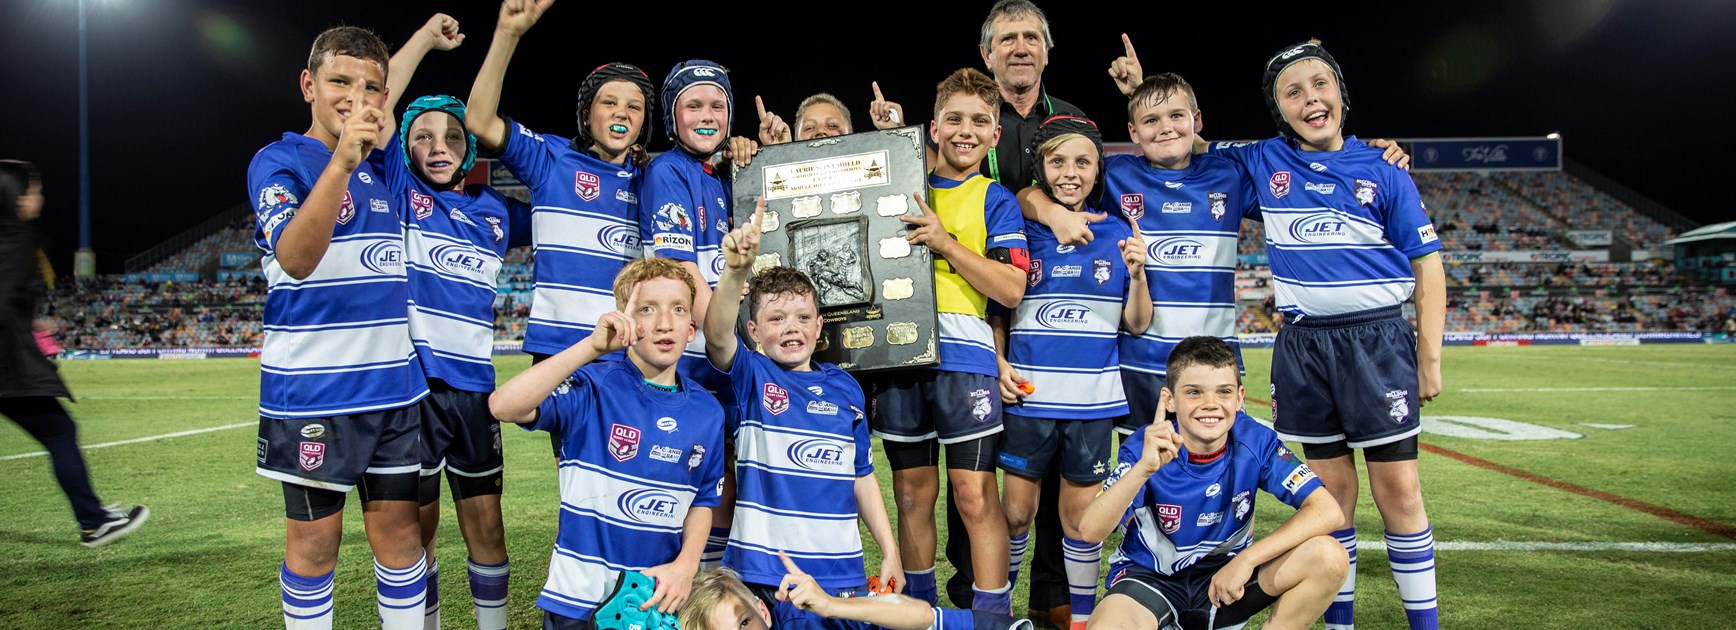 Mackay Brothers claim 2019 Laurie Spina Shield